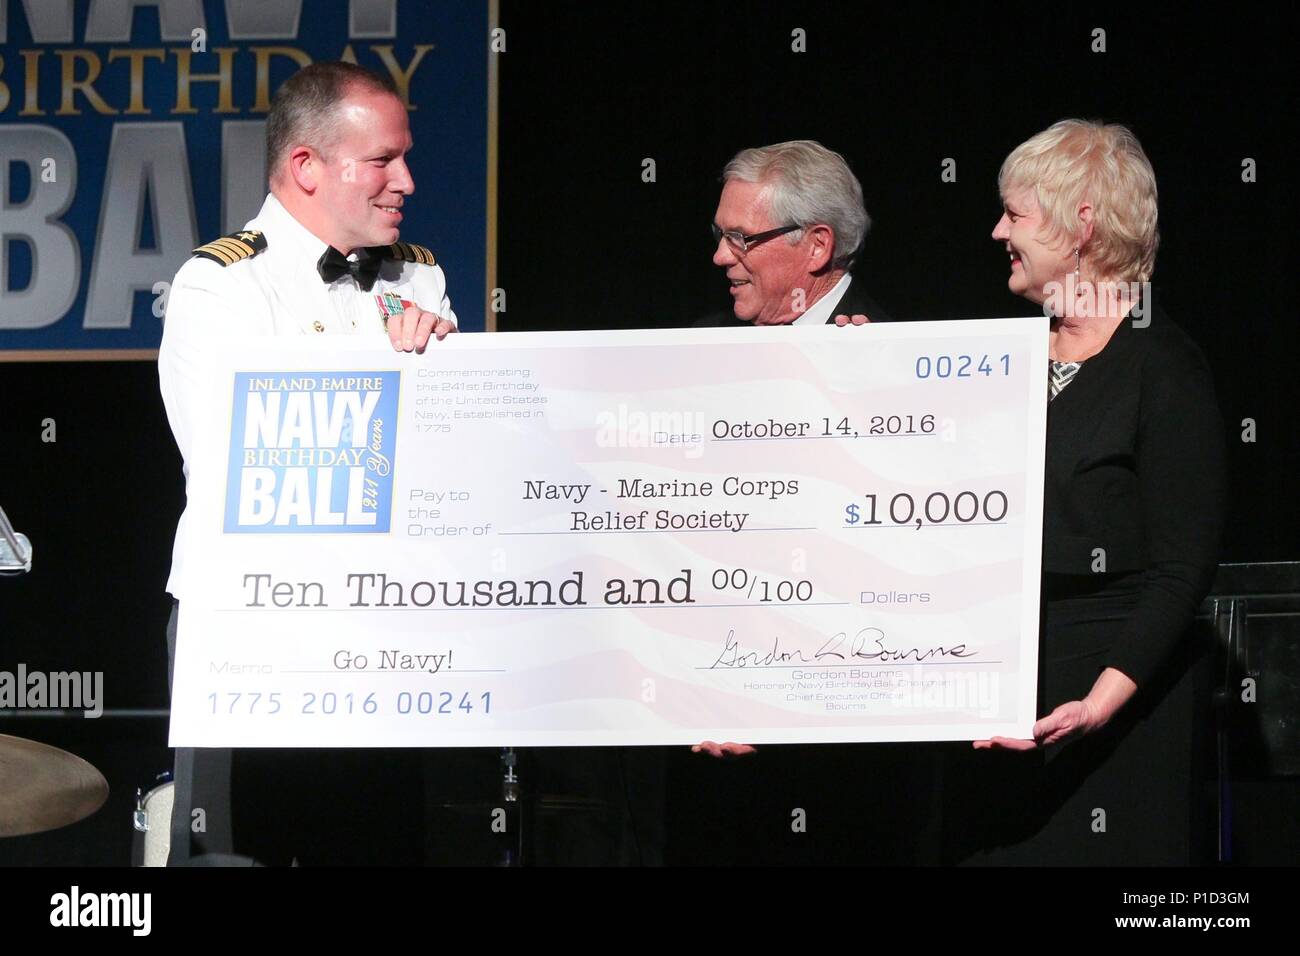 161014-N-HW977-441  RIVERSIDE, Calif. (Oct. 14, 2016) Capt. Stephen H. Murray, commanding officer of Naval Surface Warfare Center (NSWC), Corona Division, left, and Gordon Bourns, honorary Inland Empire Navy Birthday Ball chairman, present check to Donna Miranda, Navy-Marine Corps Relief Society (NMCRS) San Onofre and Camp Pendleton director. The sold-out event, commemorating the Navy's 241st birthday, included dinner, ceremonies, music, and dancing with all proceeds to benefit NMCRS. (U.S. Navy photo by Greg Vojtko/Released) Stock Photo